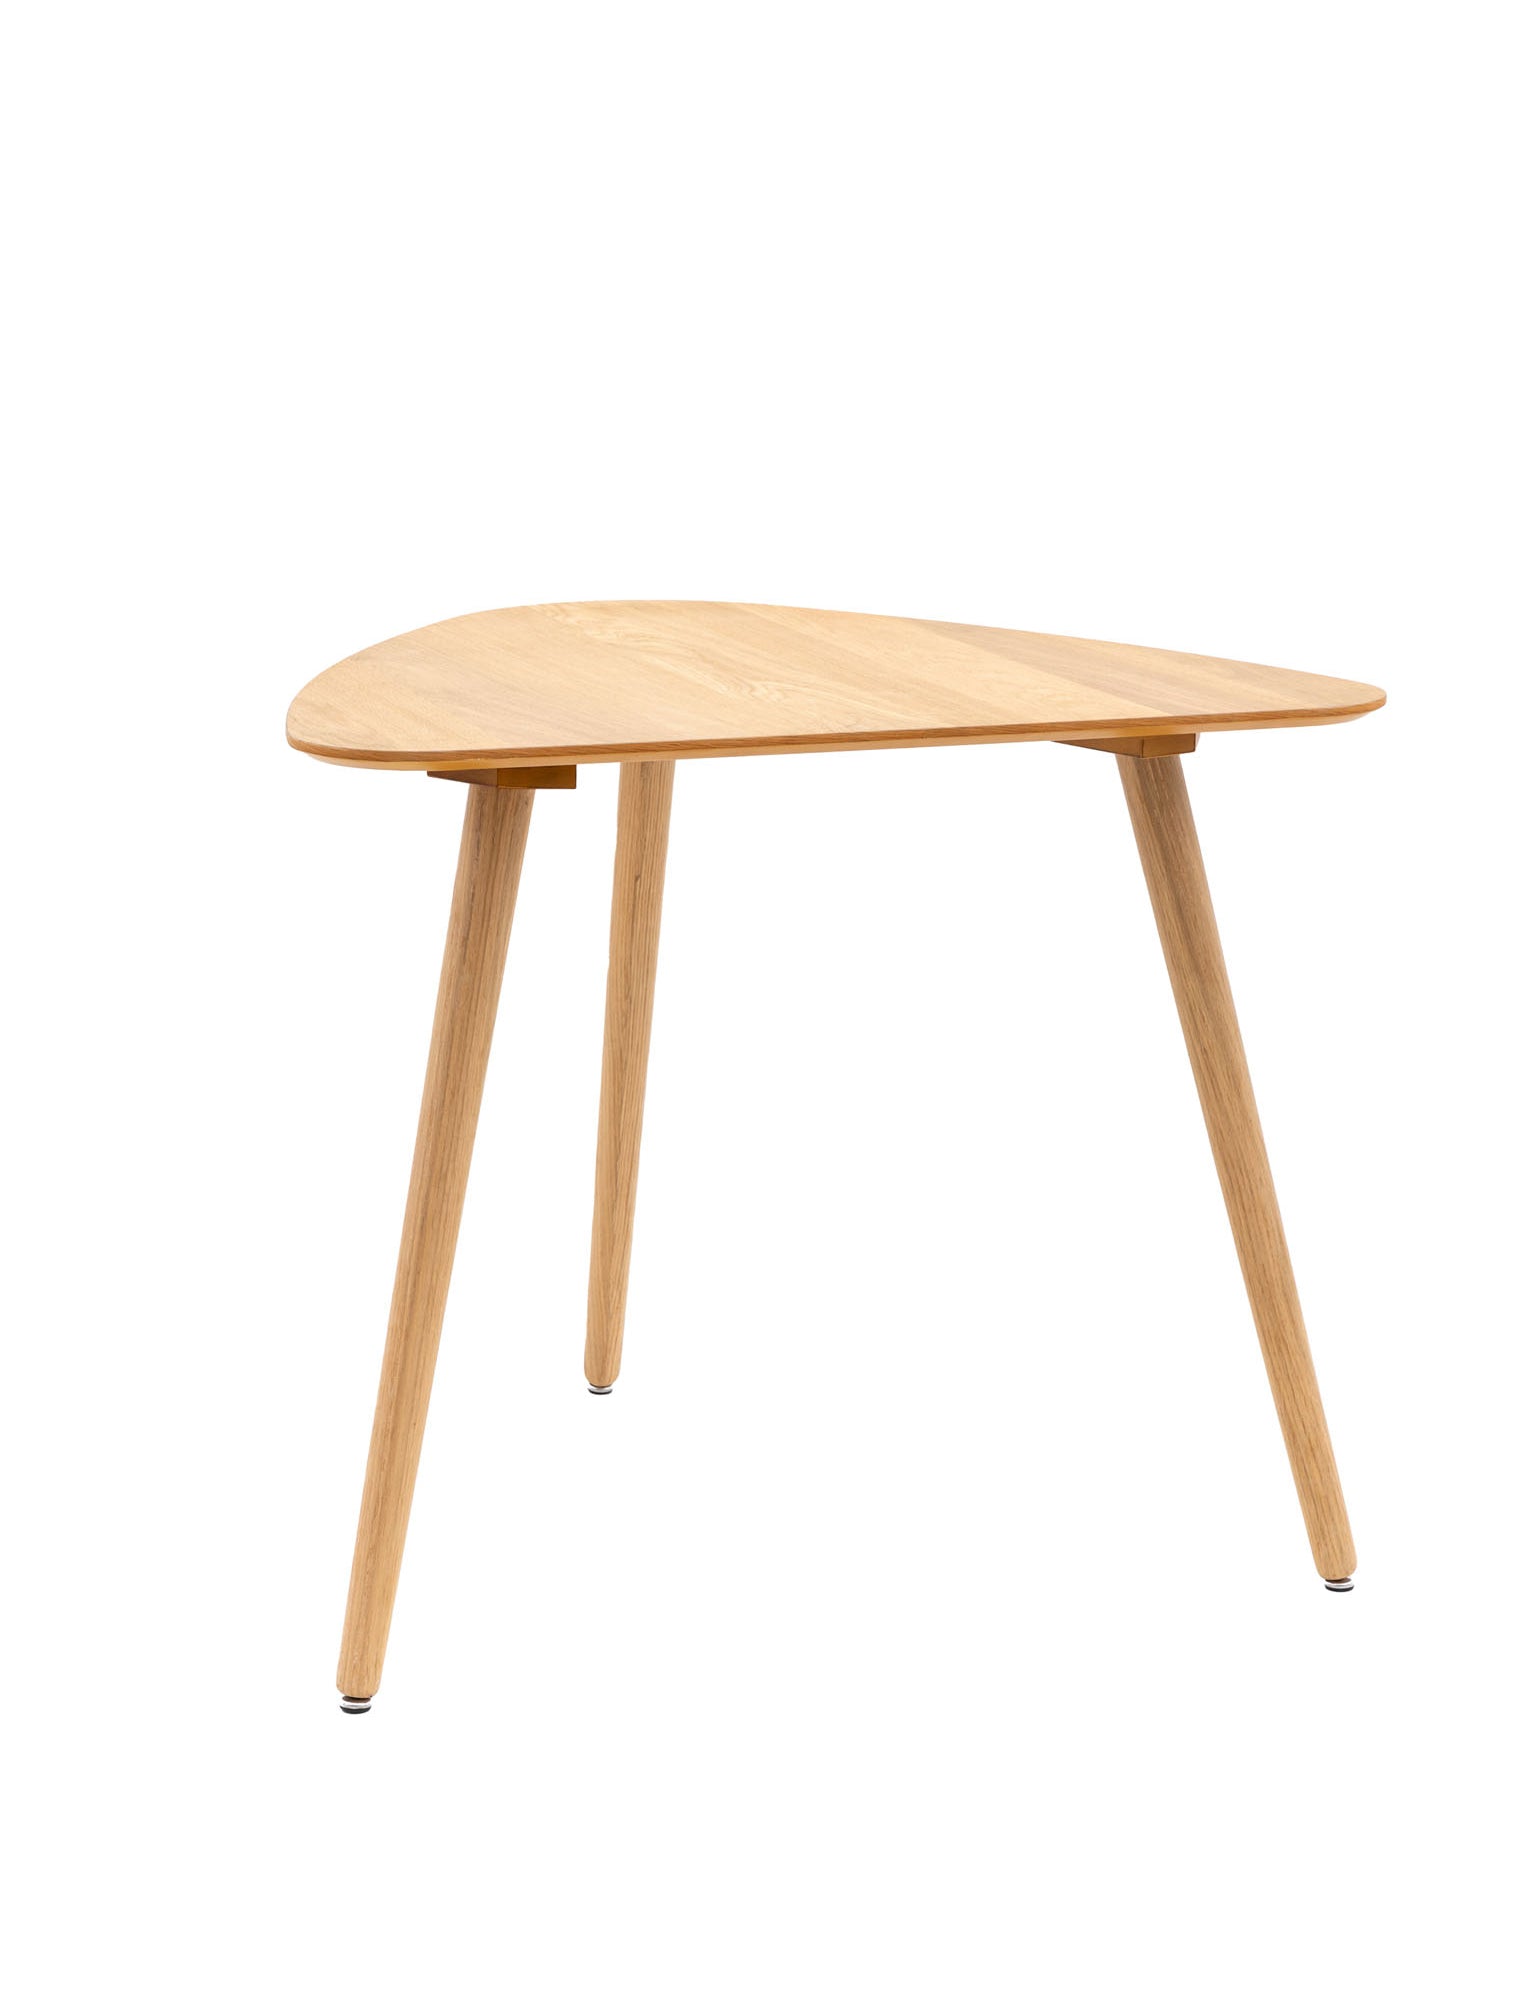 Small Two Person Oval Dining Table